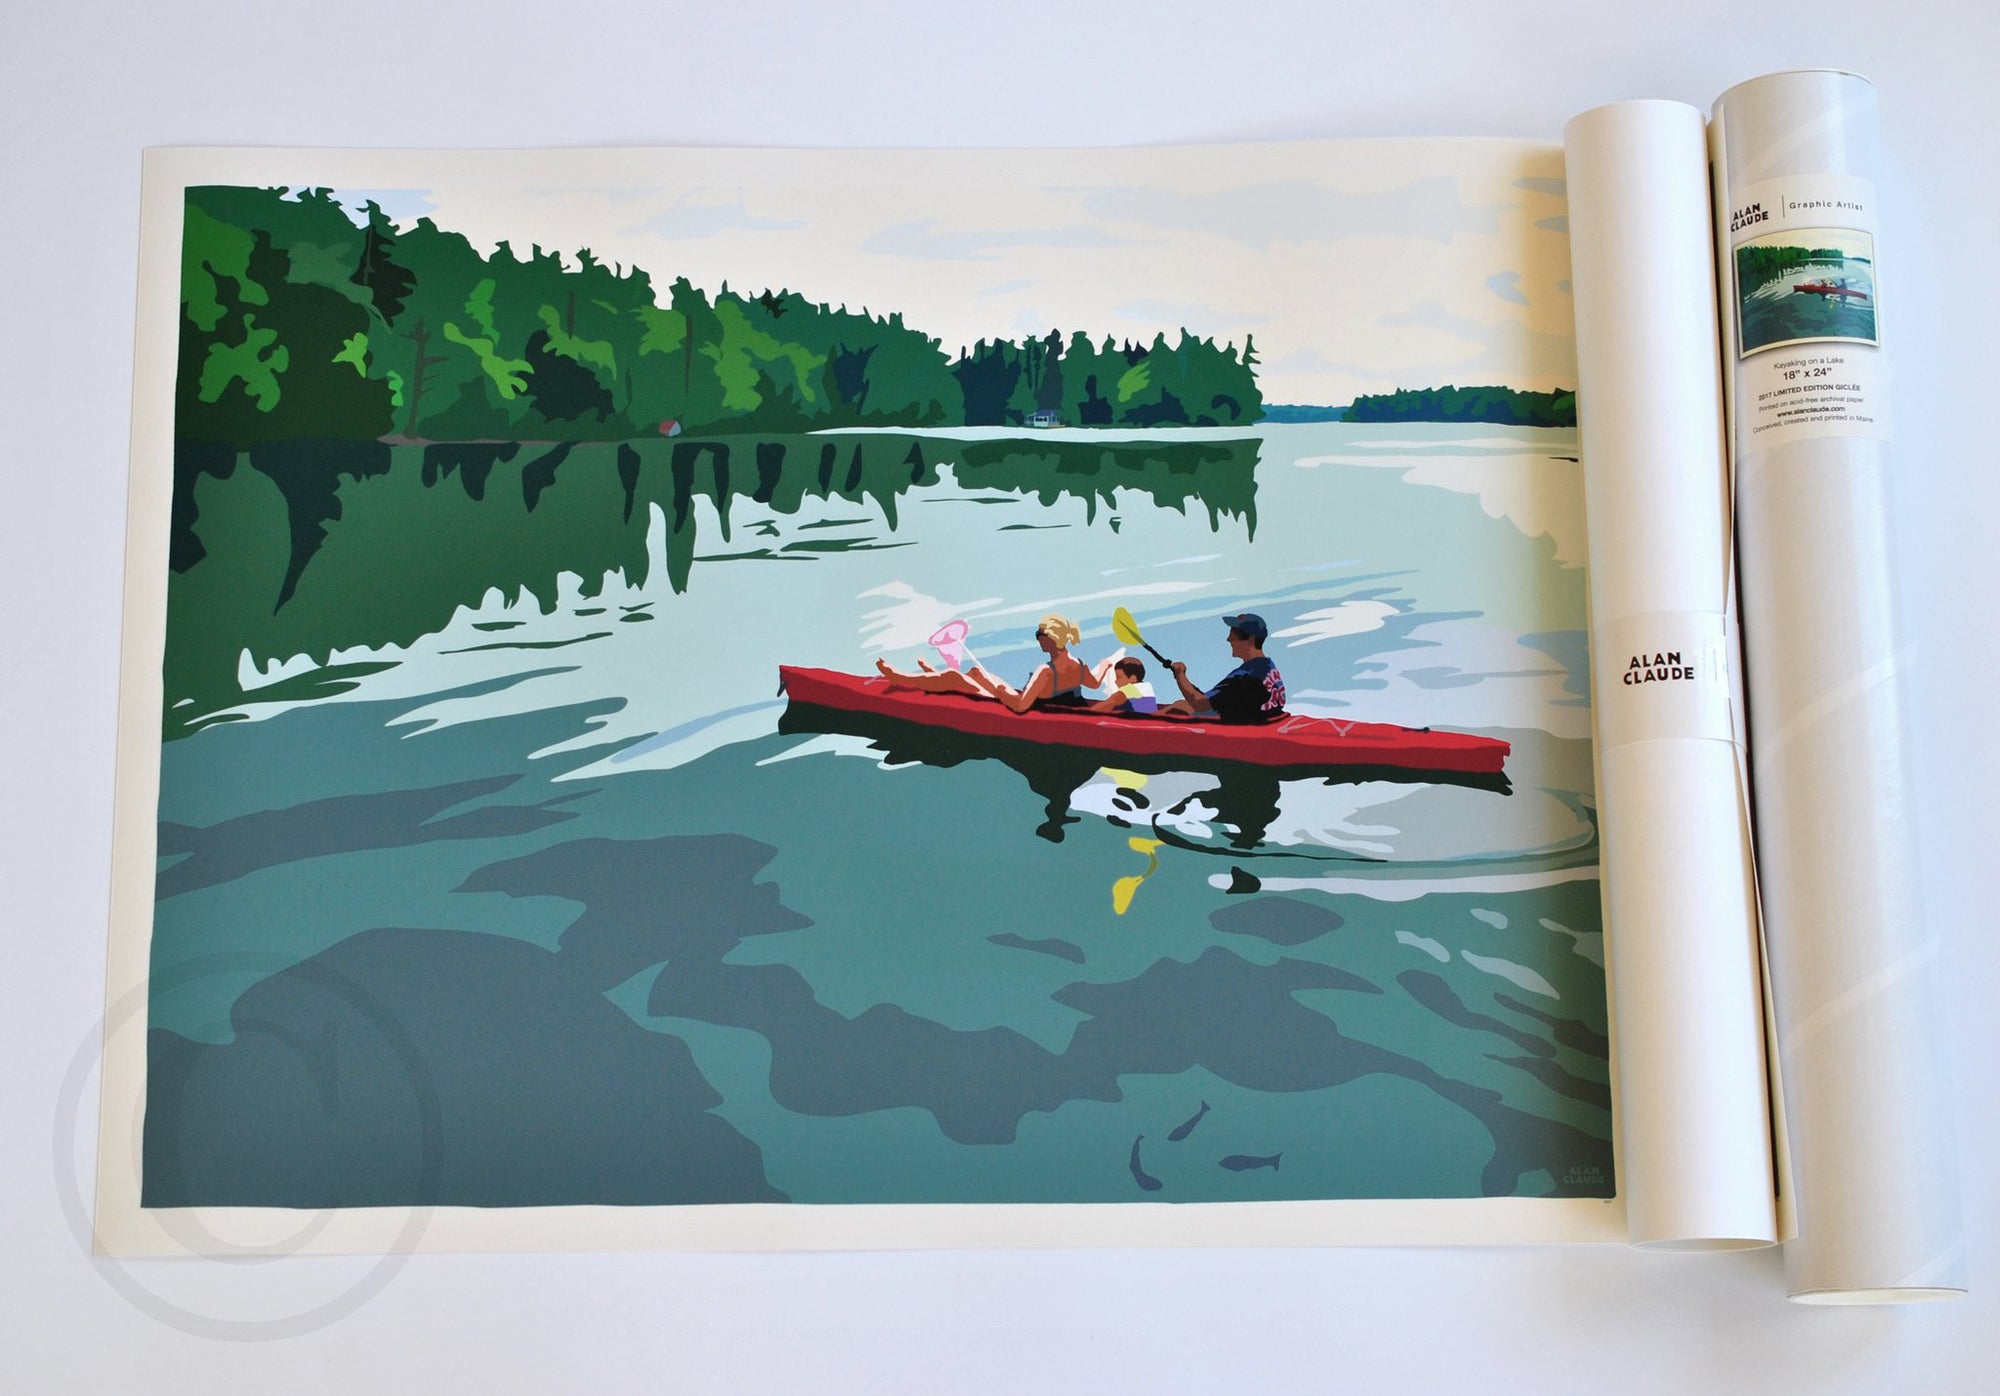 Kayaking on a Lake Art Print 18" x 24" Wall Poster By Alan Claude - Maine